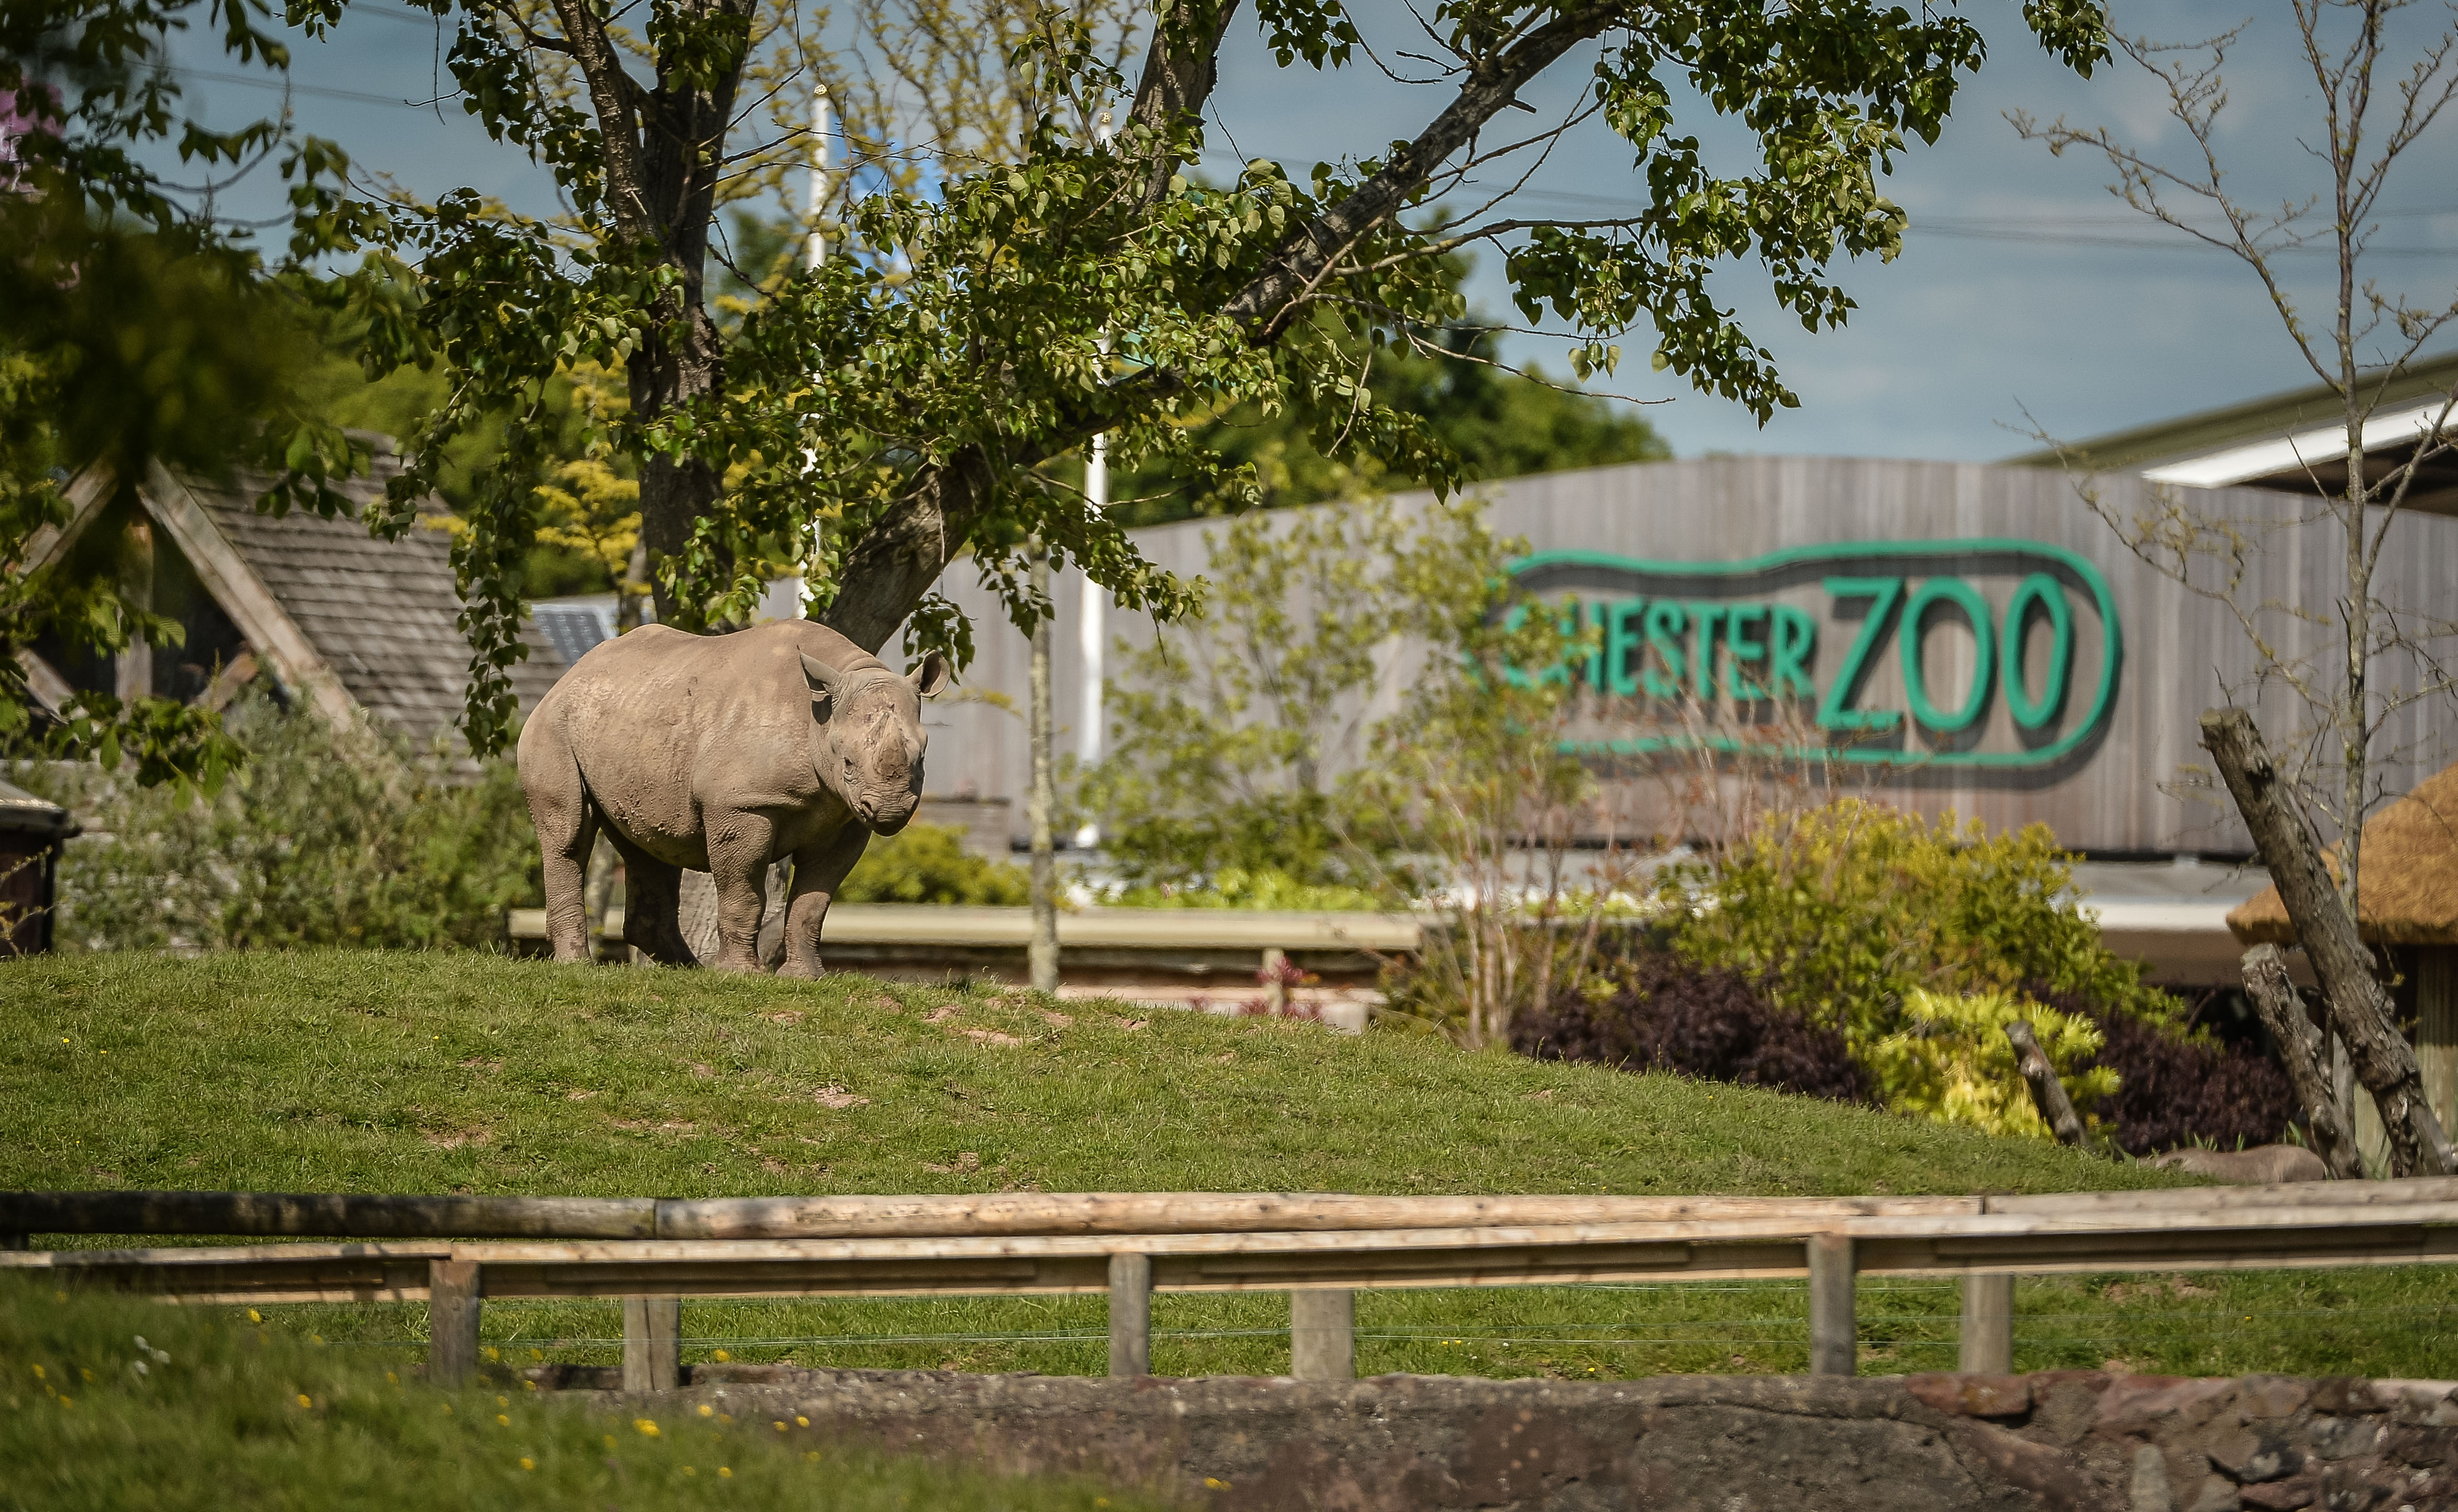 Rhino next to Chester Zoo sign